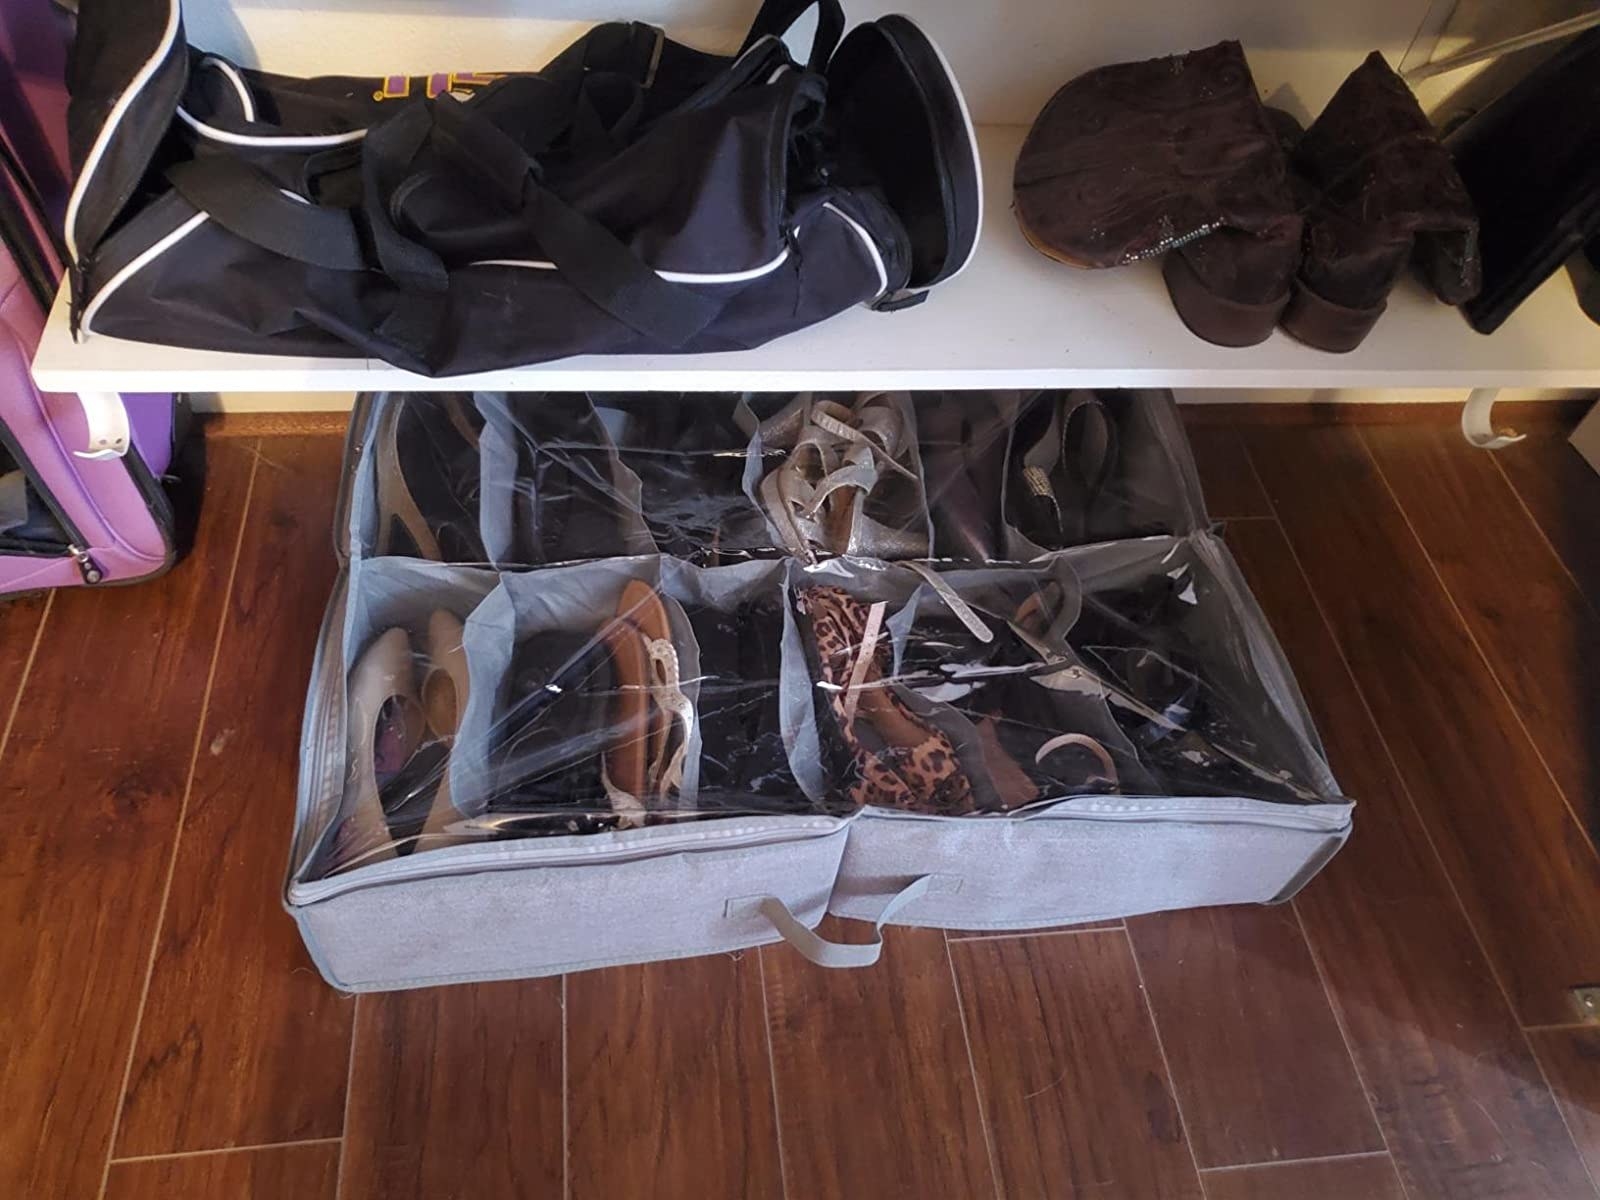 reviewer image of the shoe organizer full of shoes slid under a bench with a bag and boots on top